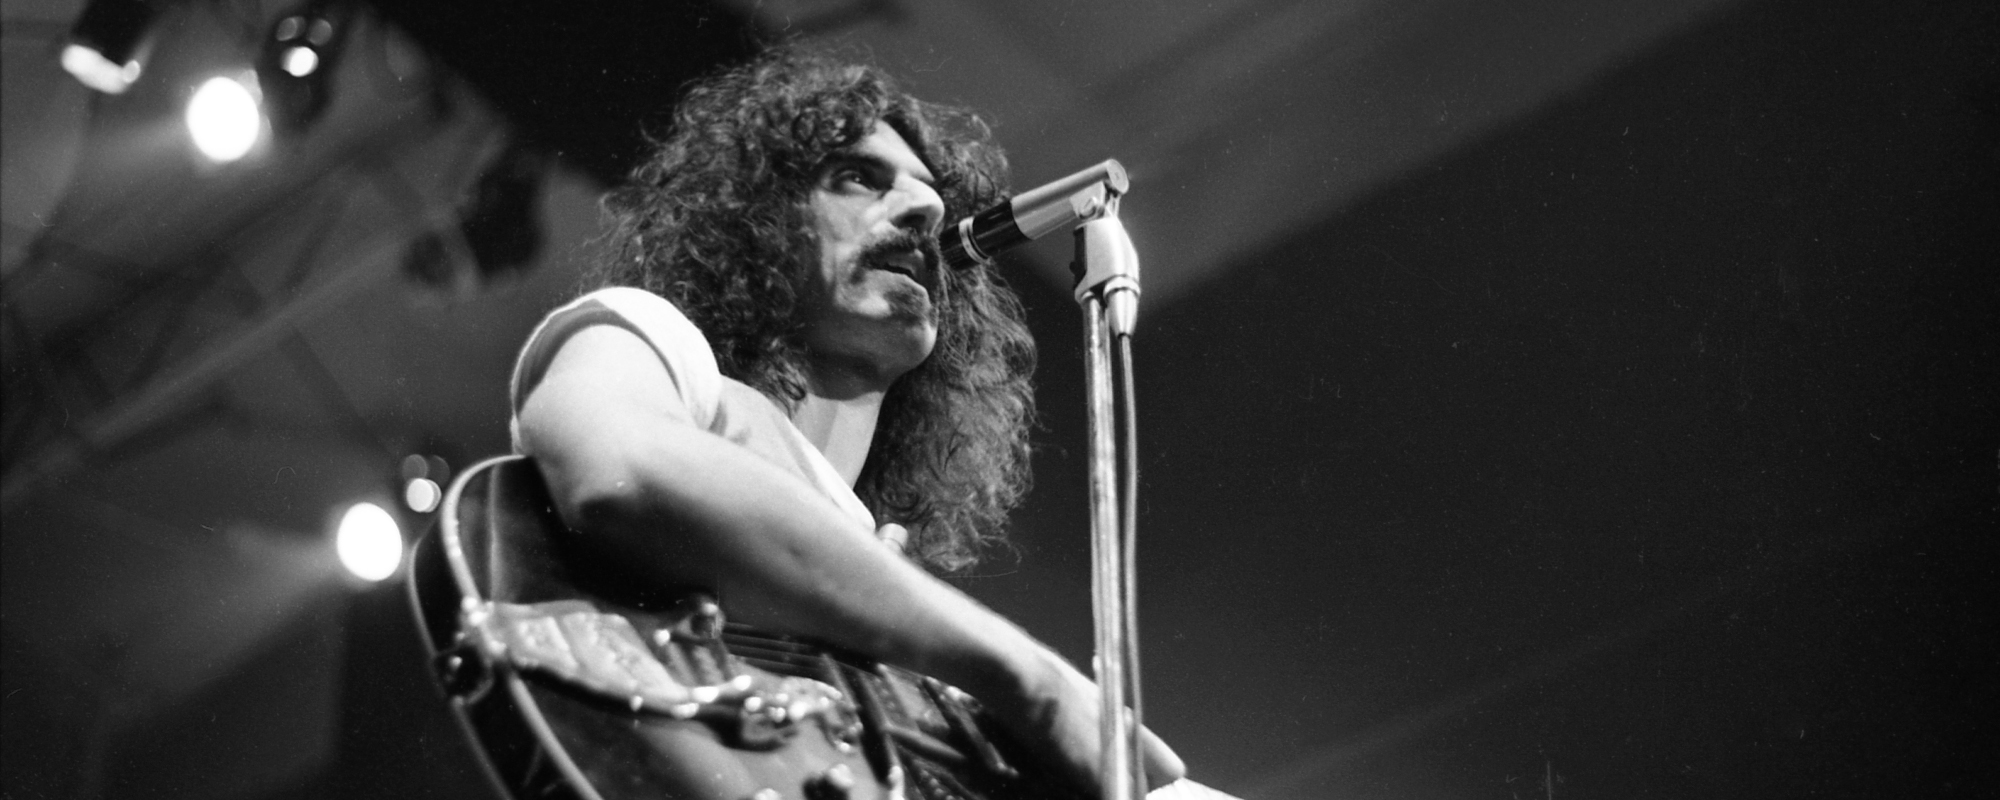 Review: Frank Zappa & the Mothers Still Fresh and Edgy 50 Years Later